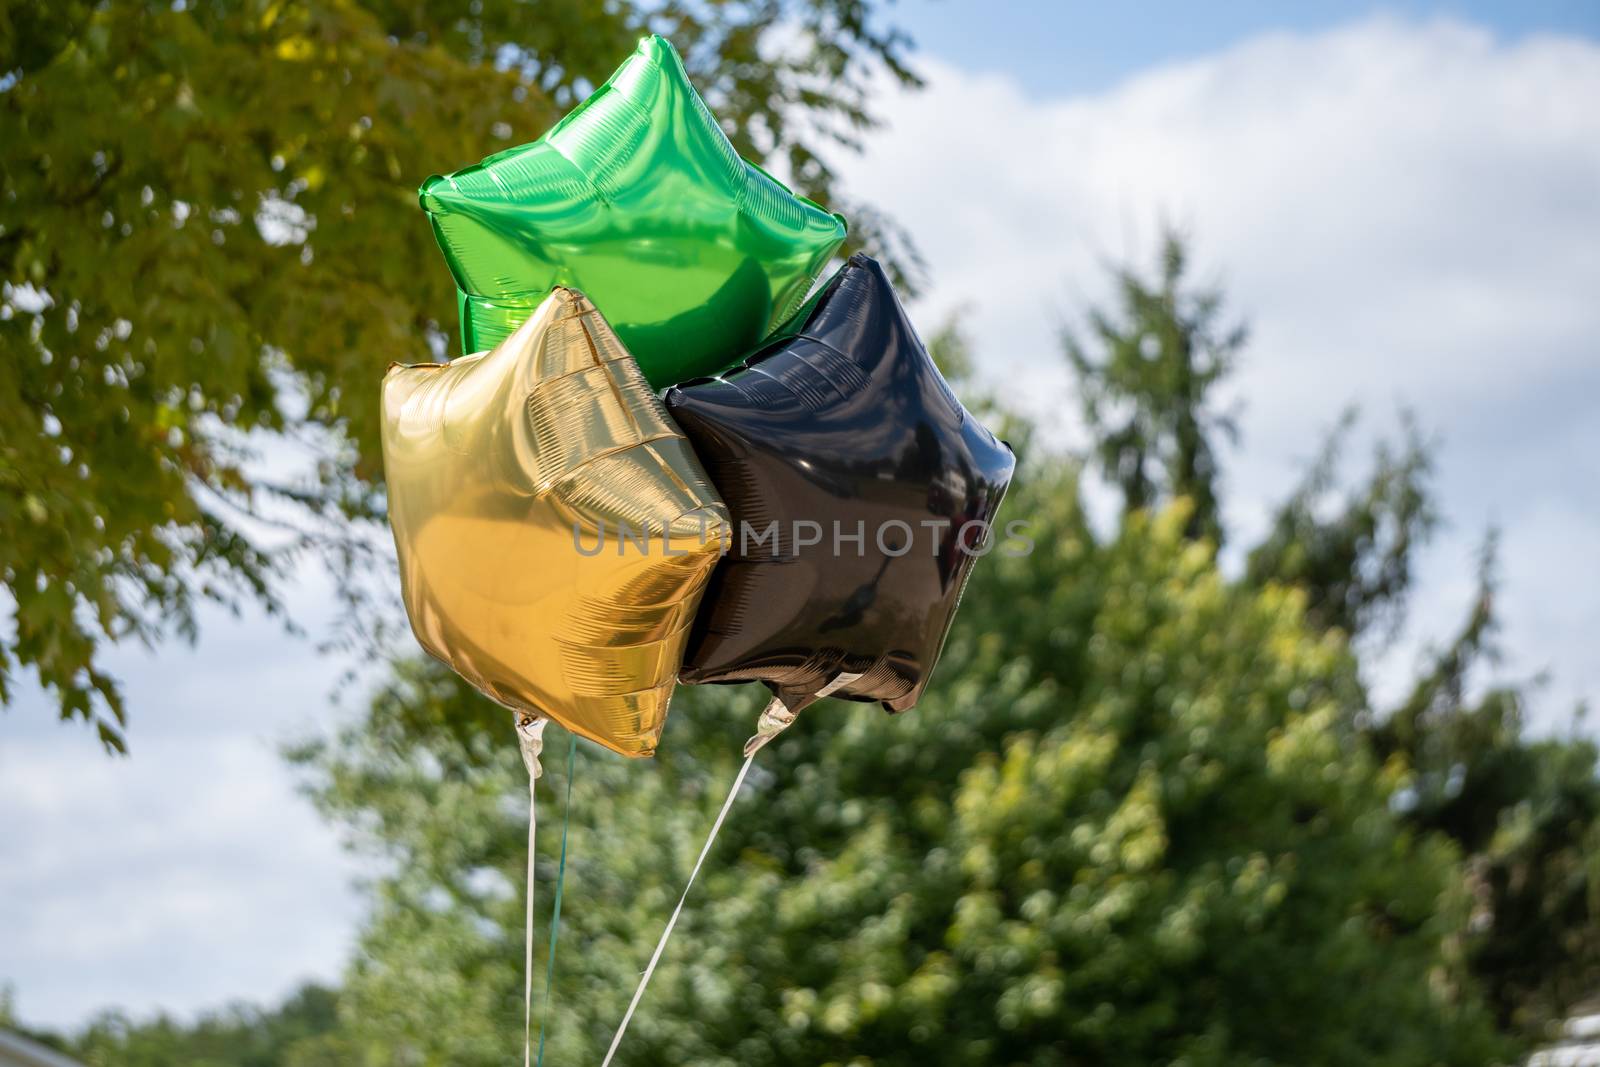 Jamaican themed balloons for a party outside